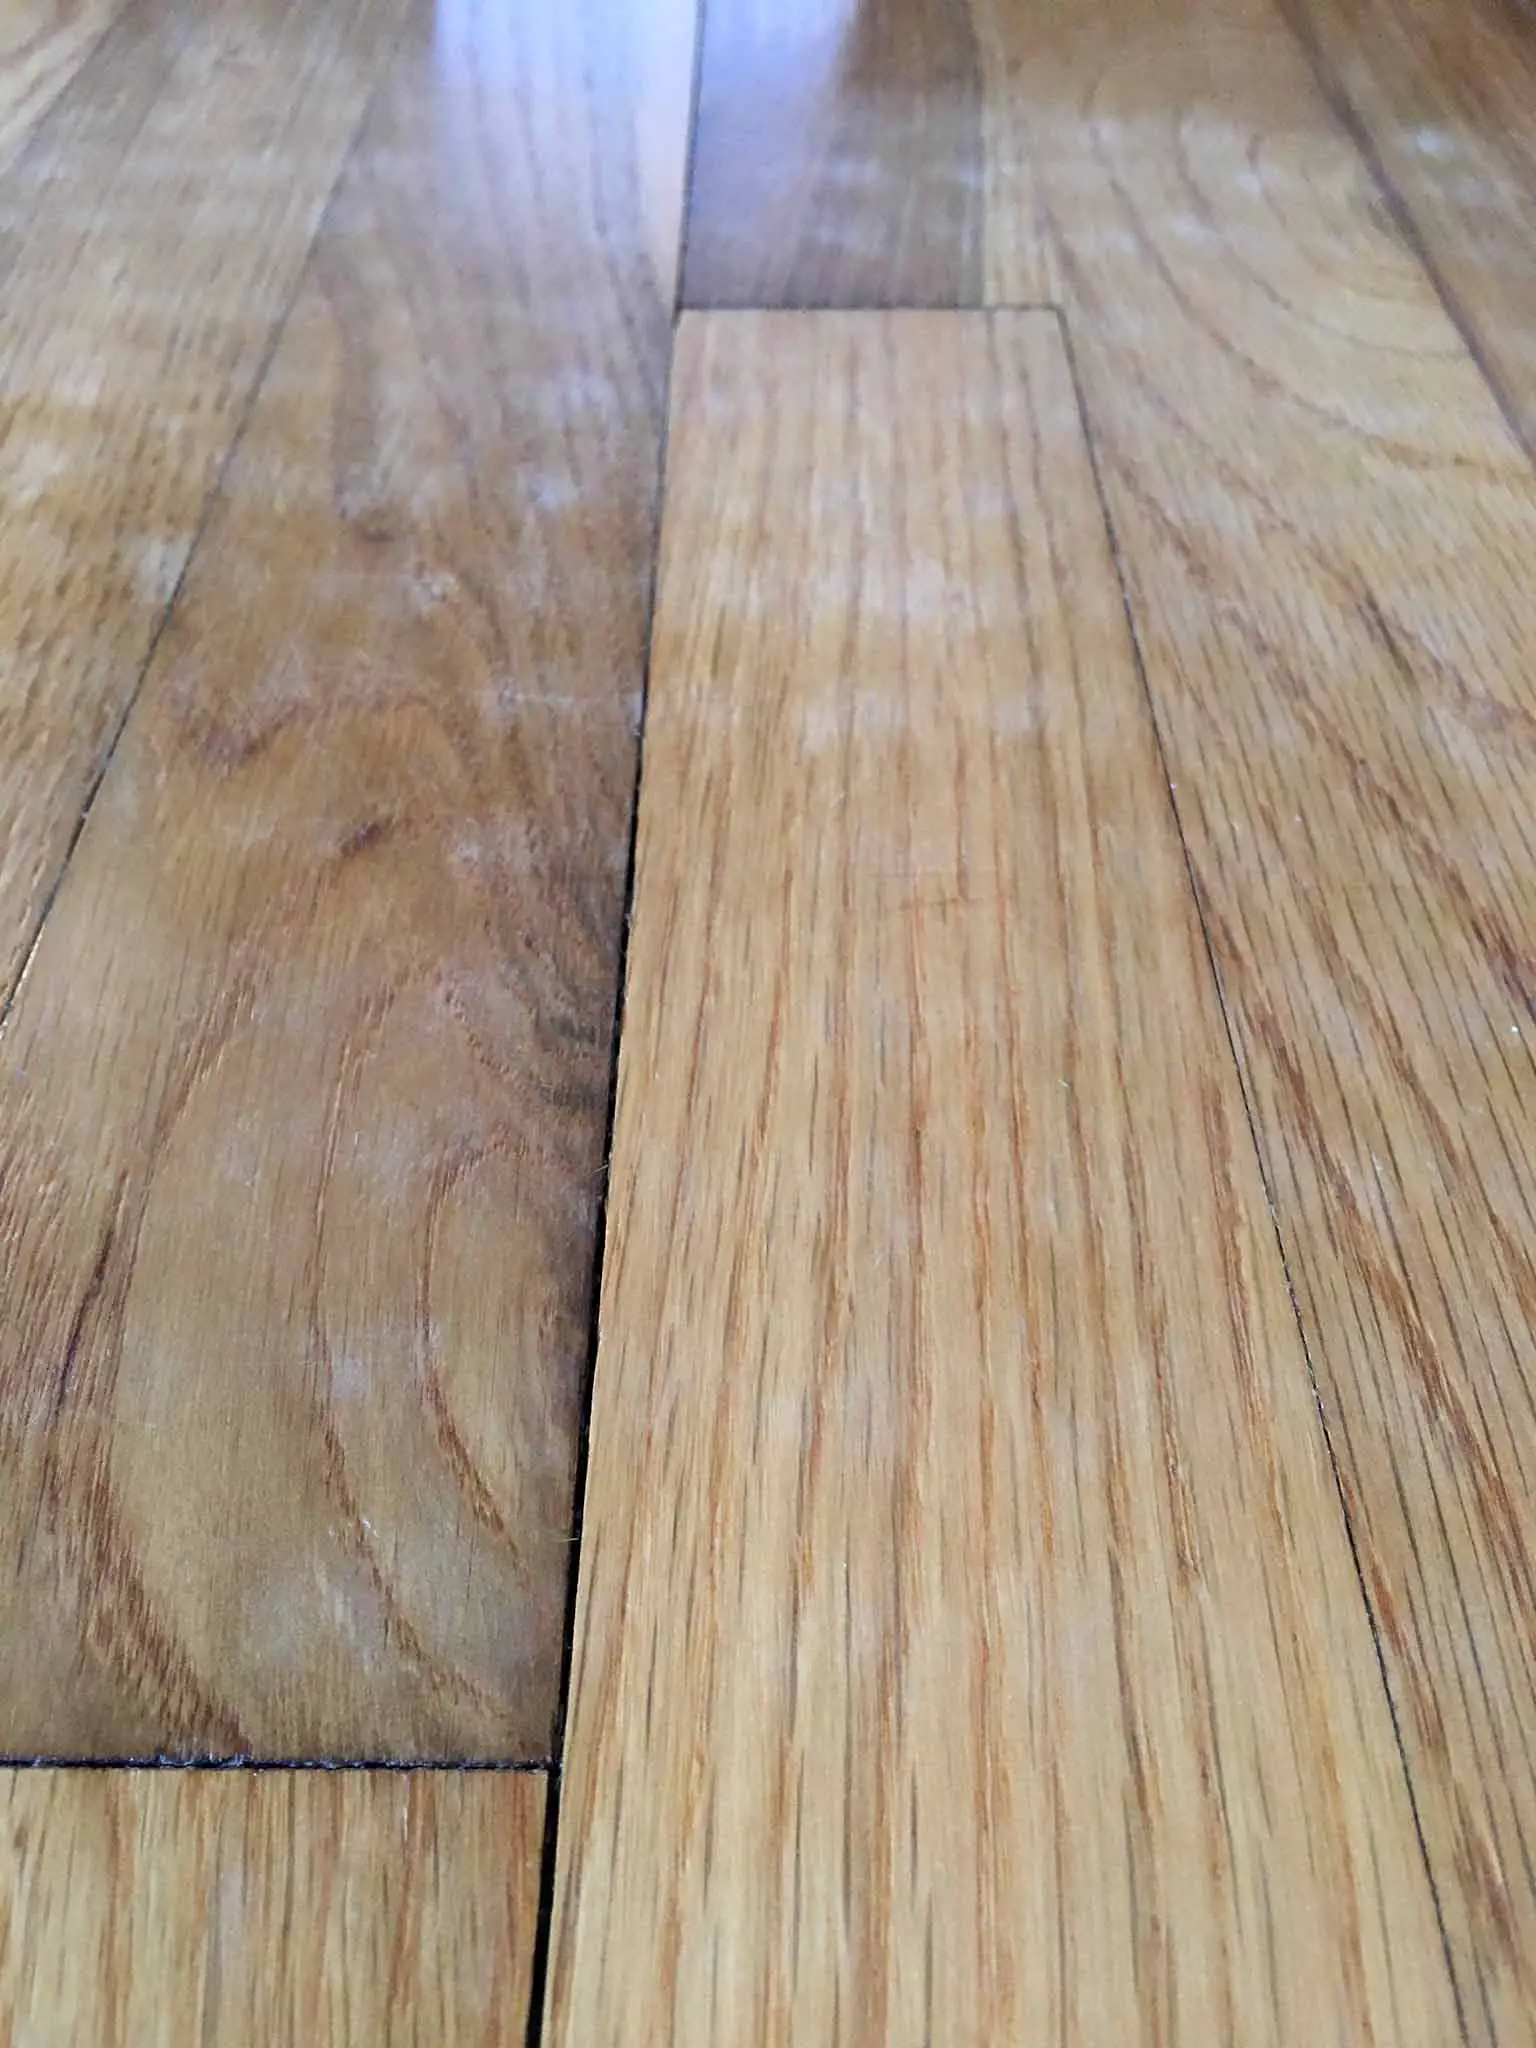 How I Wrecked My Hardwood Floors And, Safe For Hardwood Floor Rugs